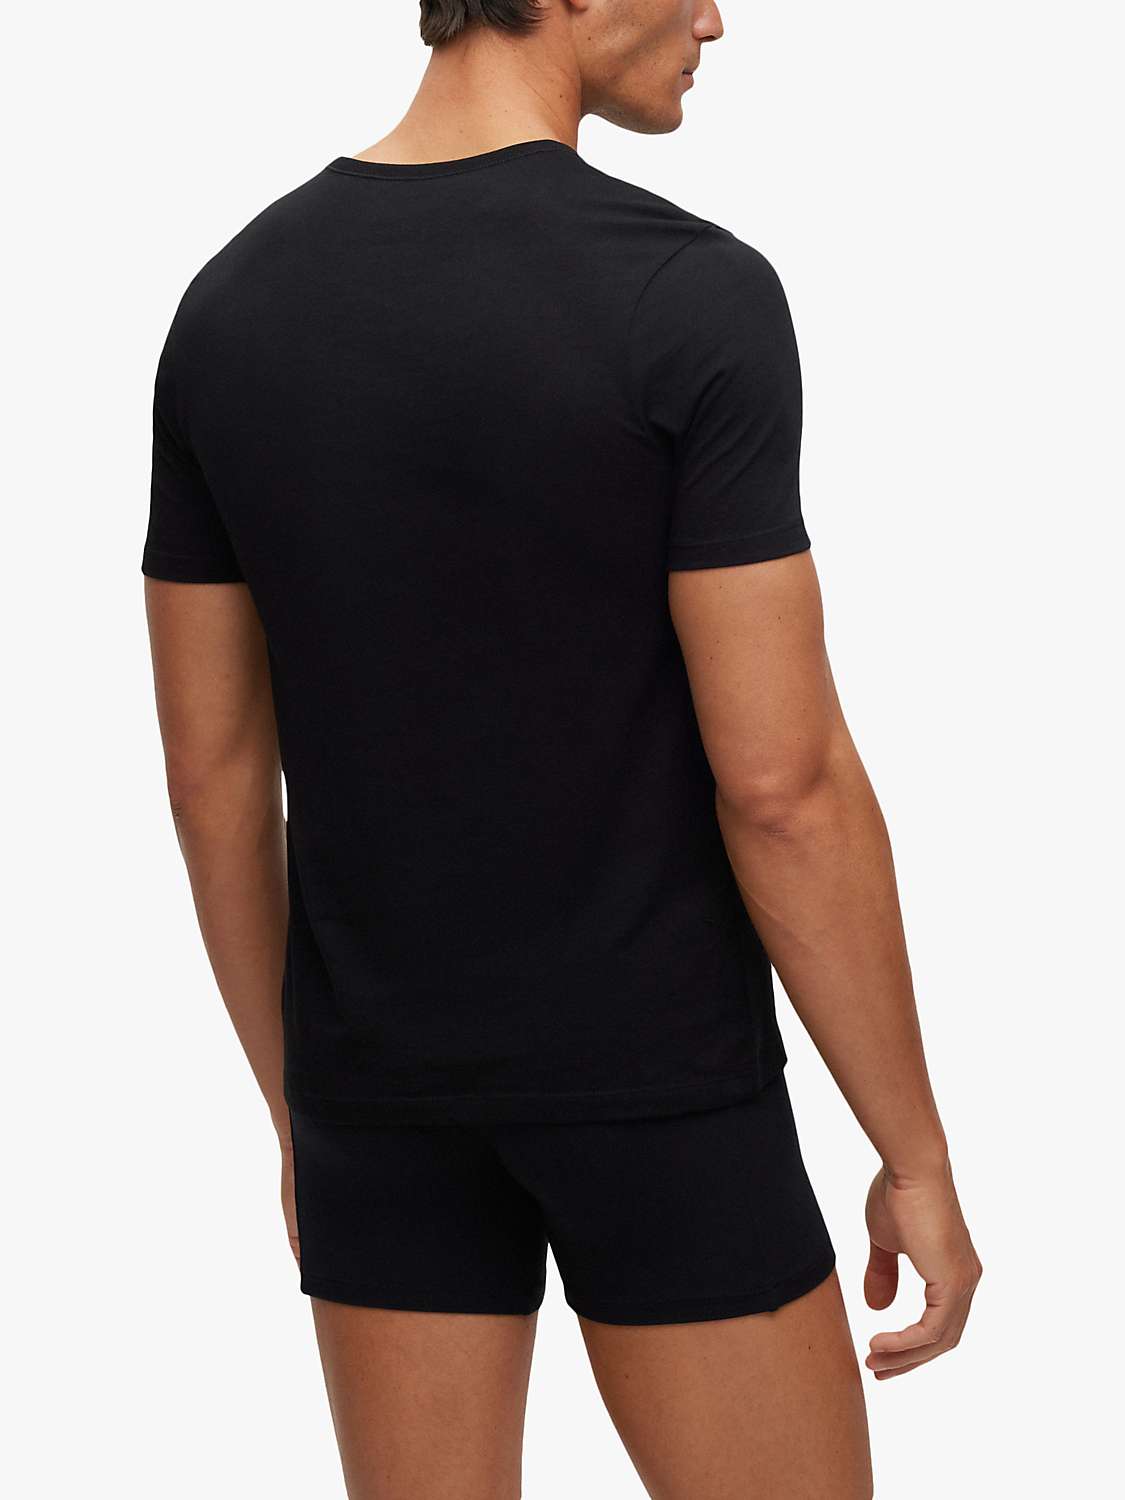 Buy HUGO BOSS Embroidered Logo Cotton T-Shirt, Pack of 3 Online at johnlewis.com